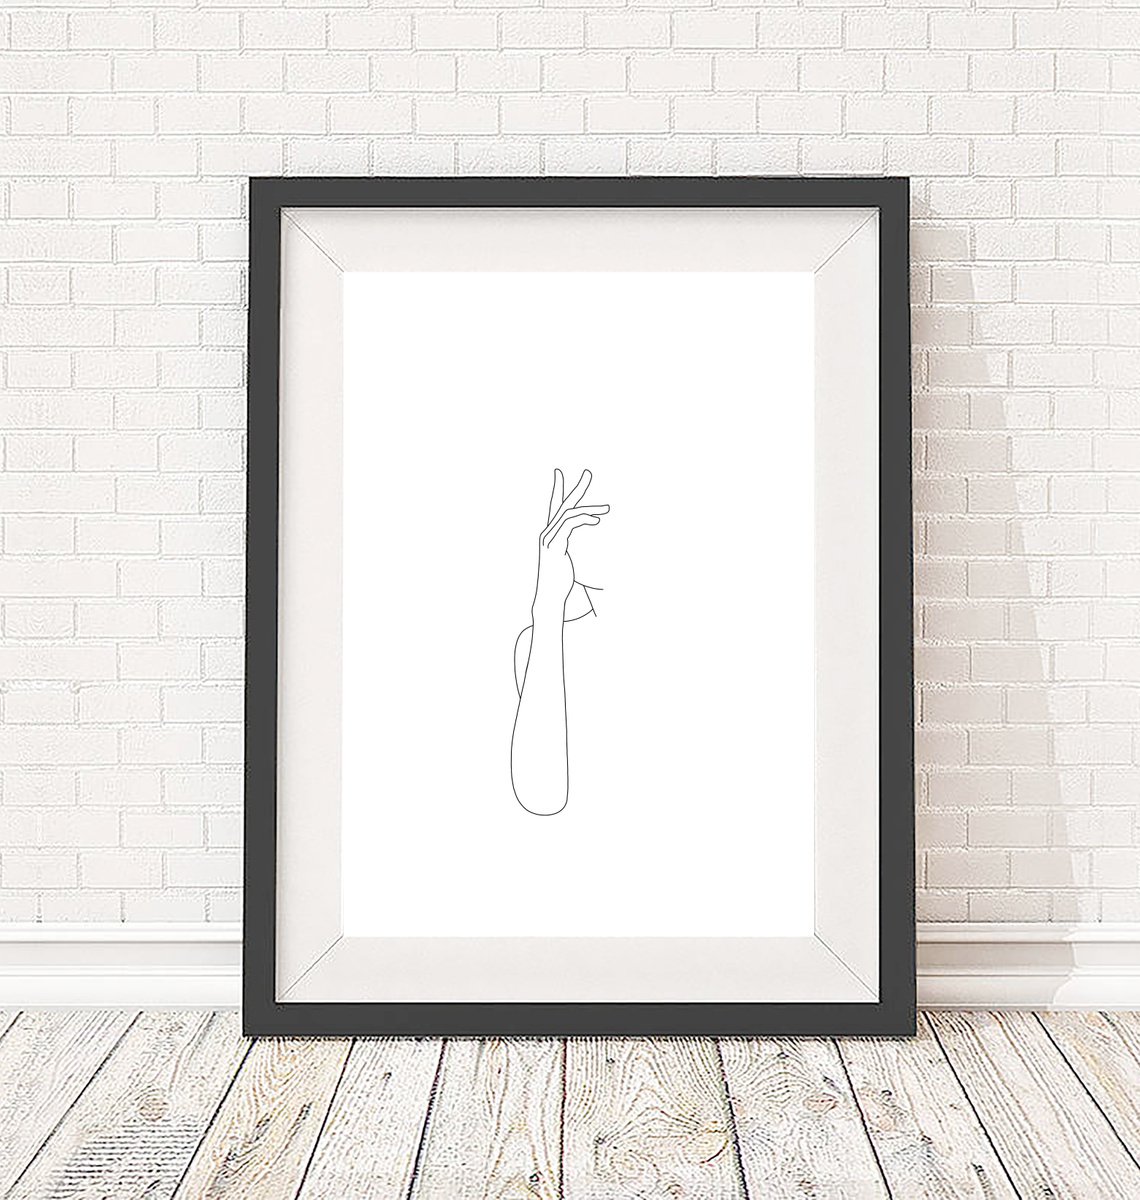 Minimalist hands illustration - Abbey - Art print by The Colour Study